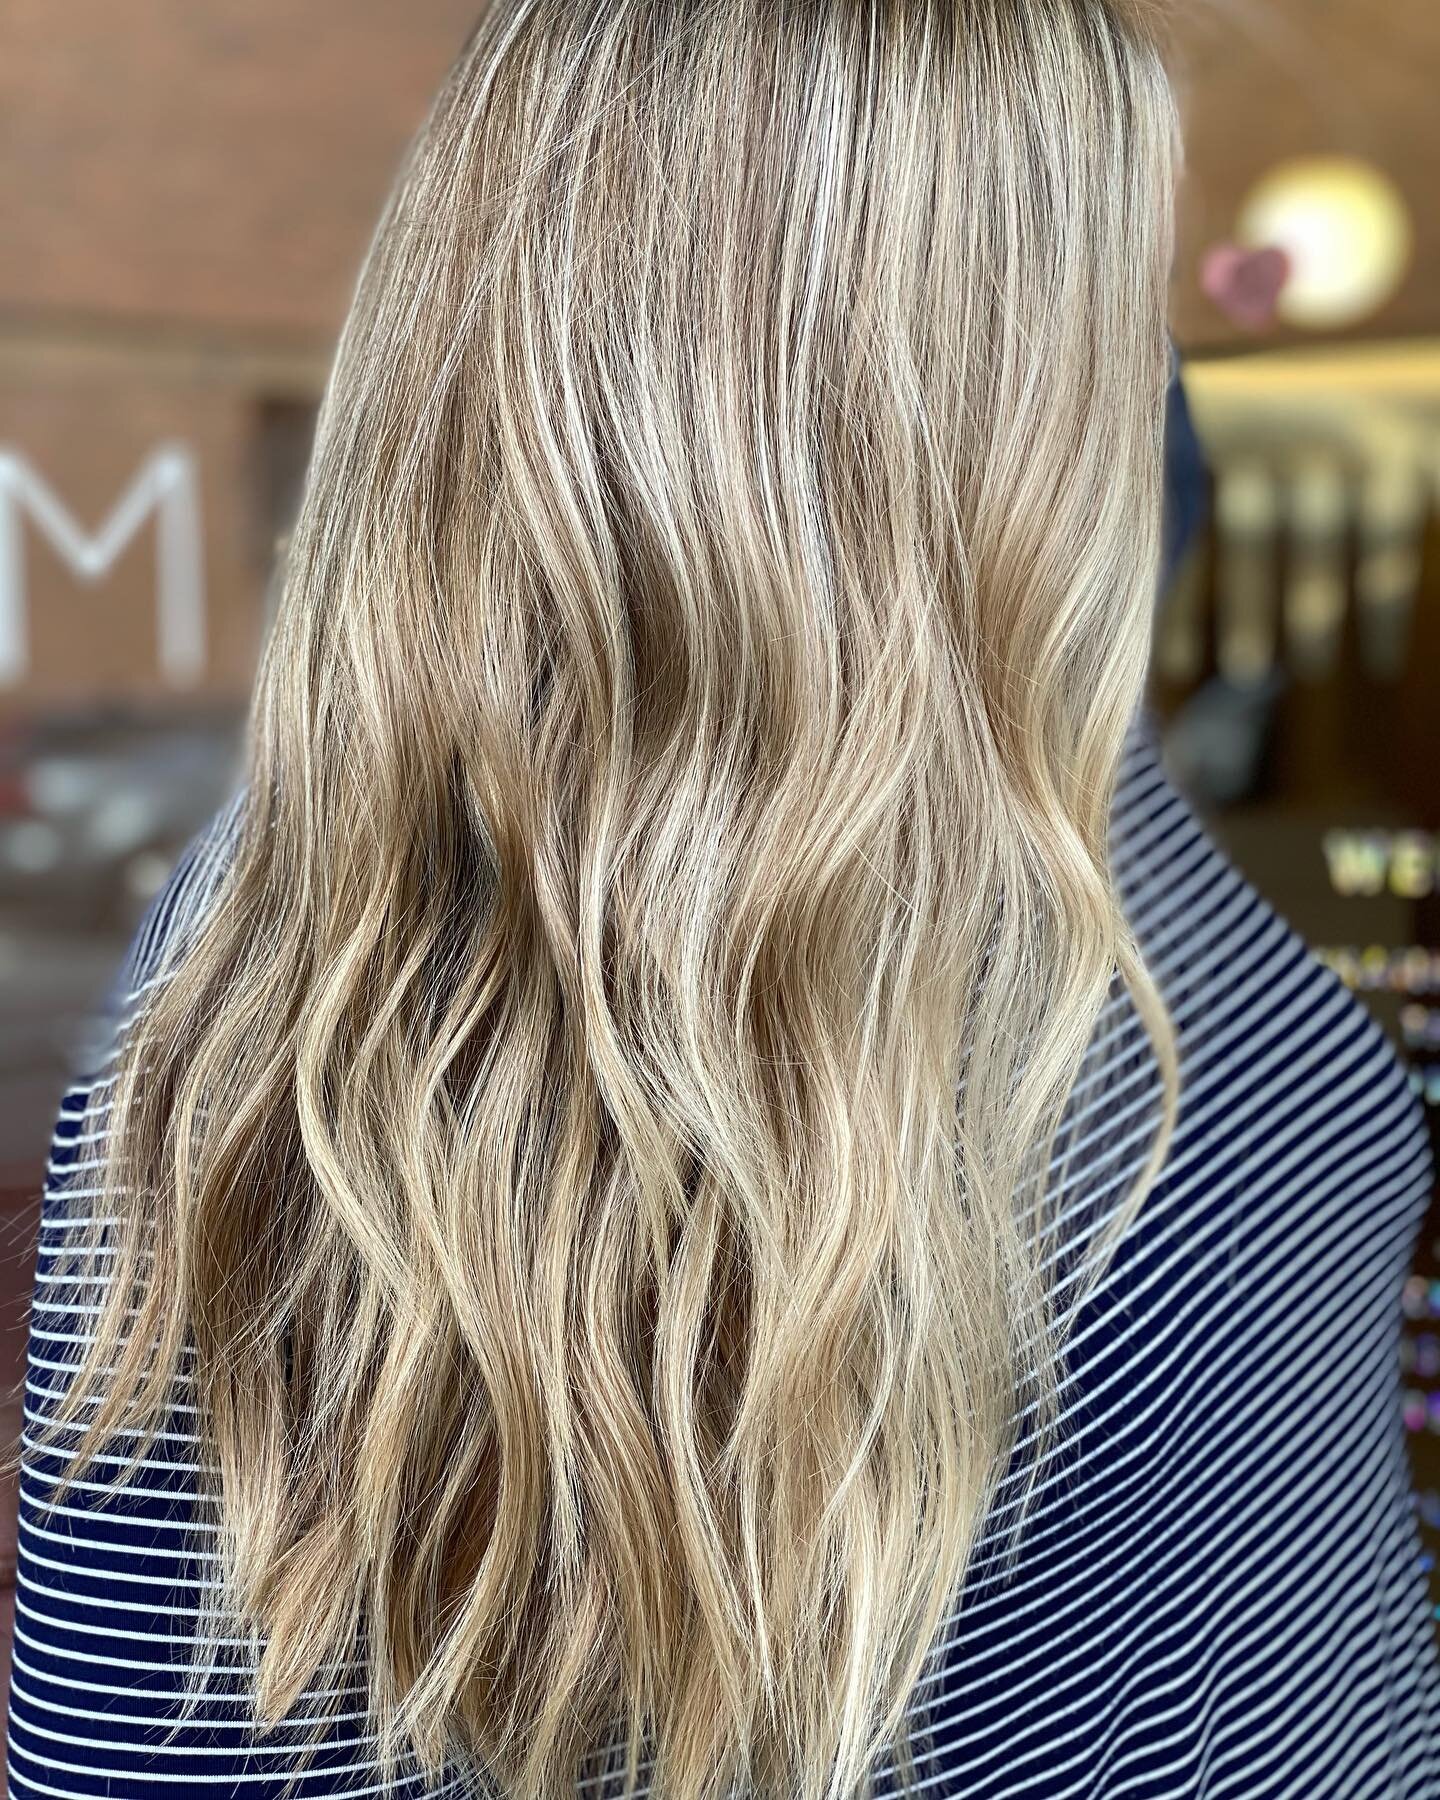 Ness✨
#rachelleatgoldcomb #goldcombsalon
I&rsquo;m sure many of you can relate to looking into a zoom screen or hearing from a client &ldquo;I just see bright white blonde hair on my screen.&rdquo; Don&rsquo;t be scared to add lowlights and warmth to